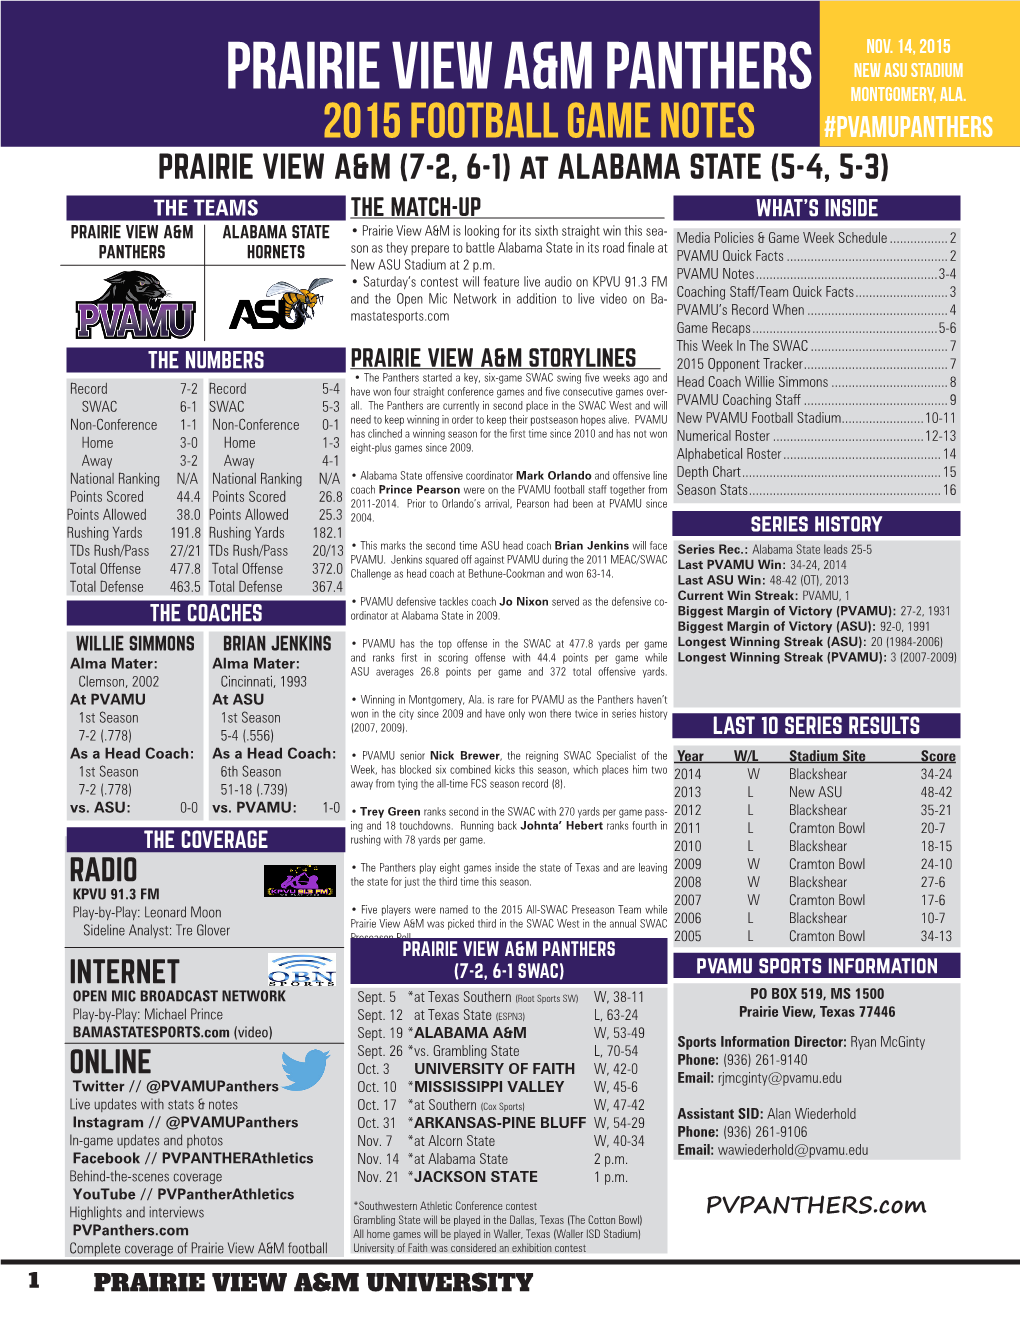 Prairie View A&M Panthers 2015 Football Game Notes